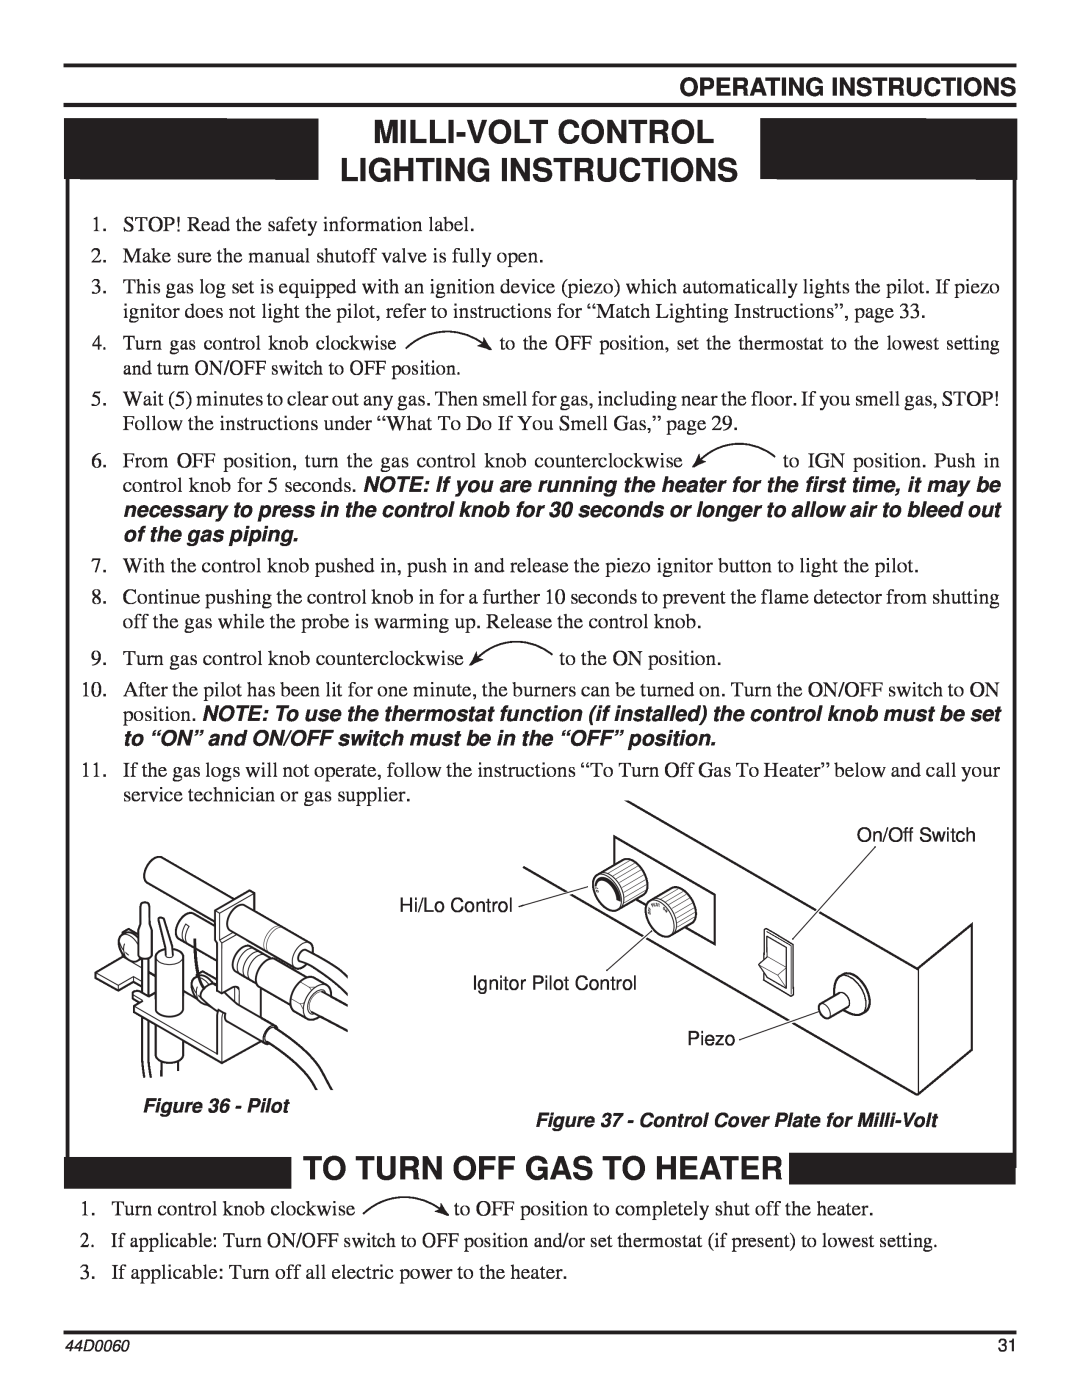 Monessen Hearth DEB30, DEB20 Milli-Voltcontrol Lighting Instructions, To Turn Off Gas To Heater, Operating Instructions 